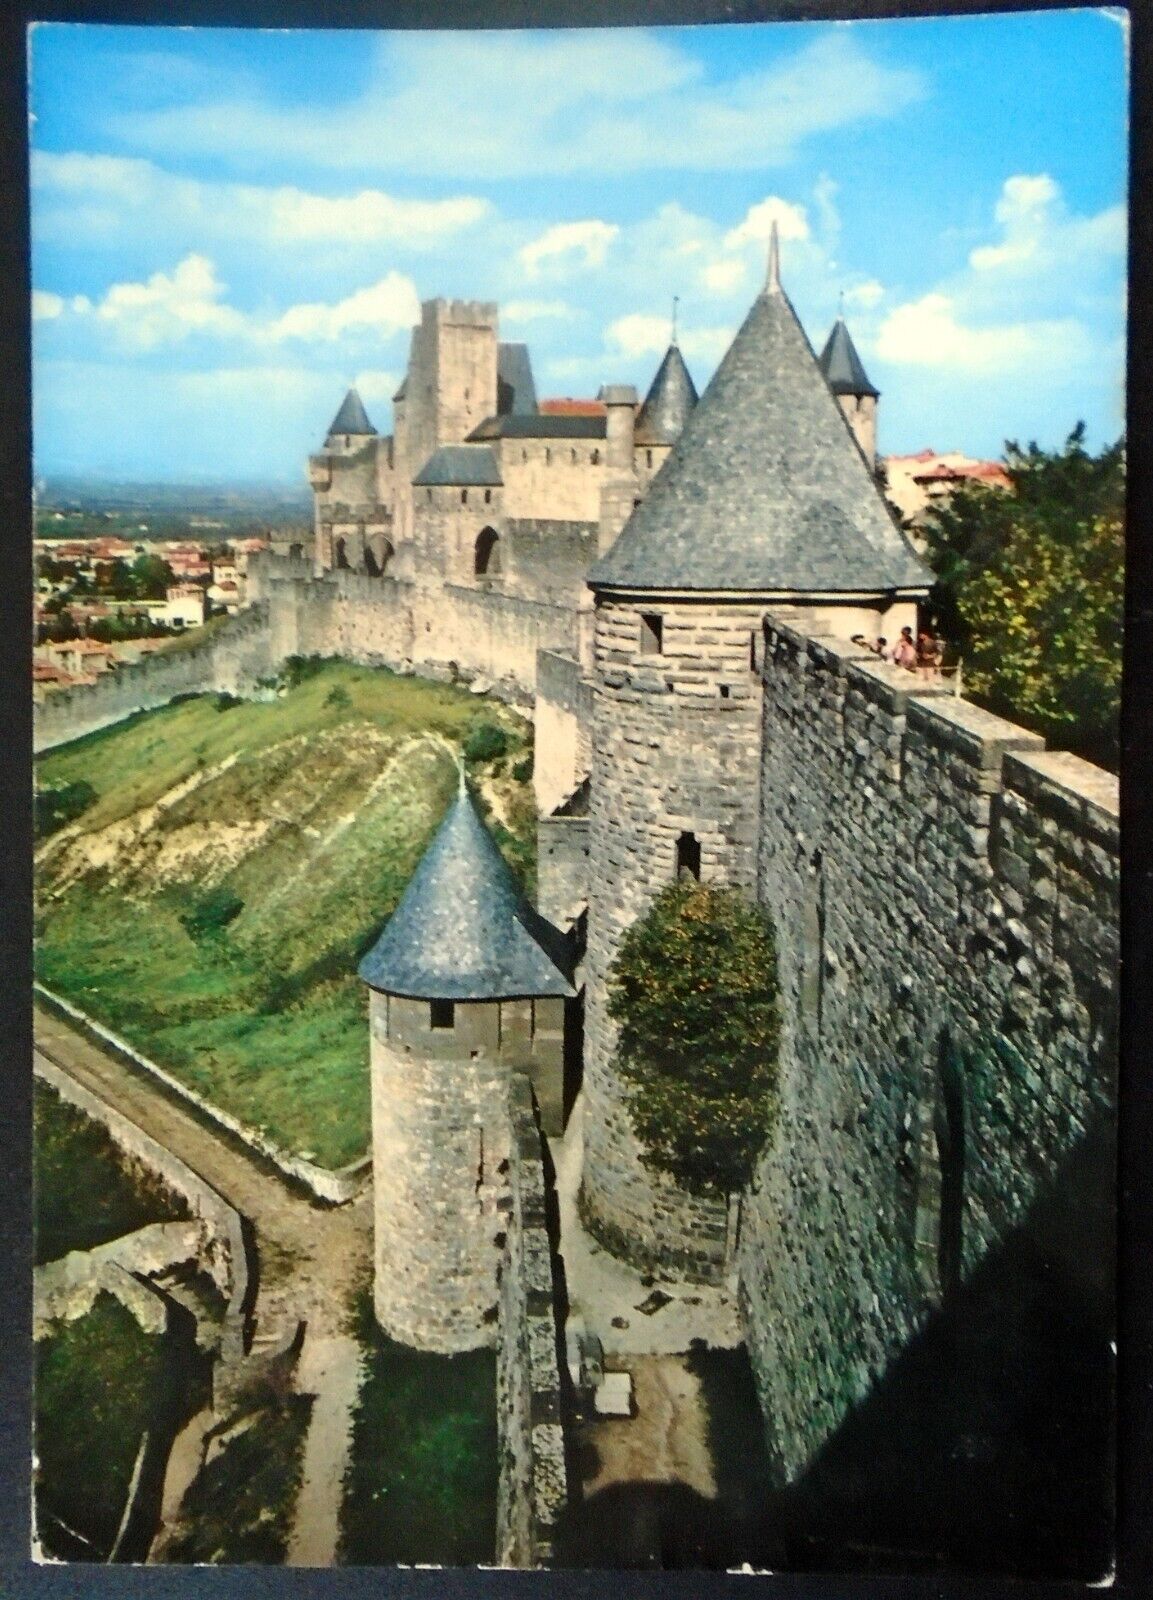 Historic Fortified City of Carcassonne, Cathedrals, Buildings, France